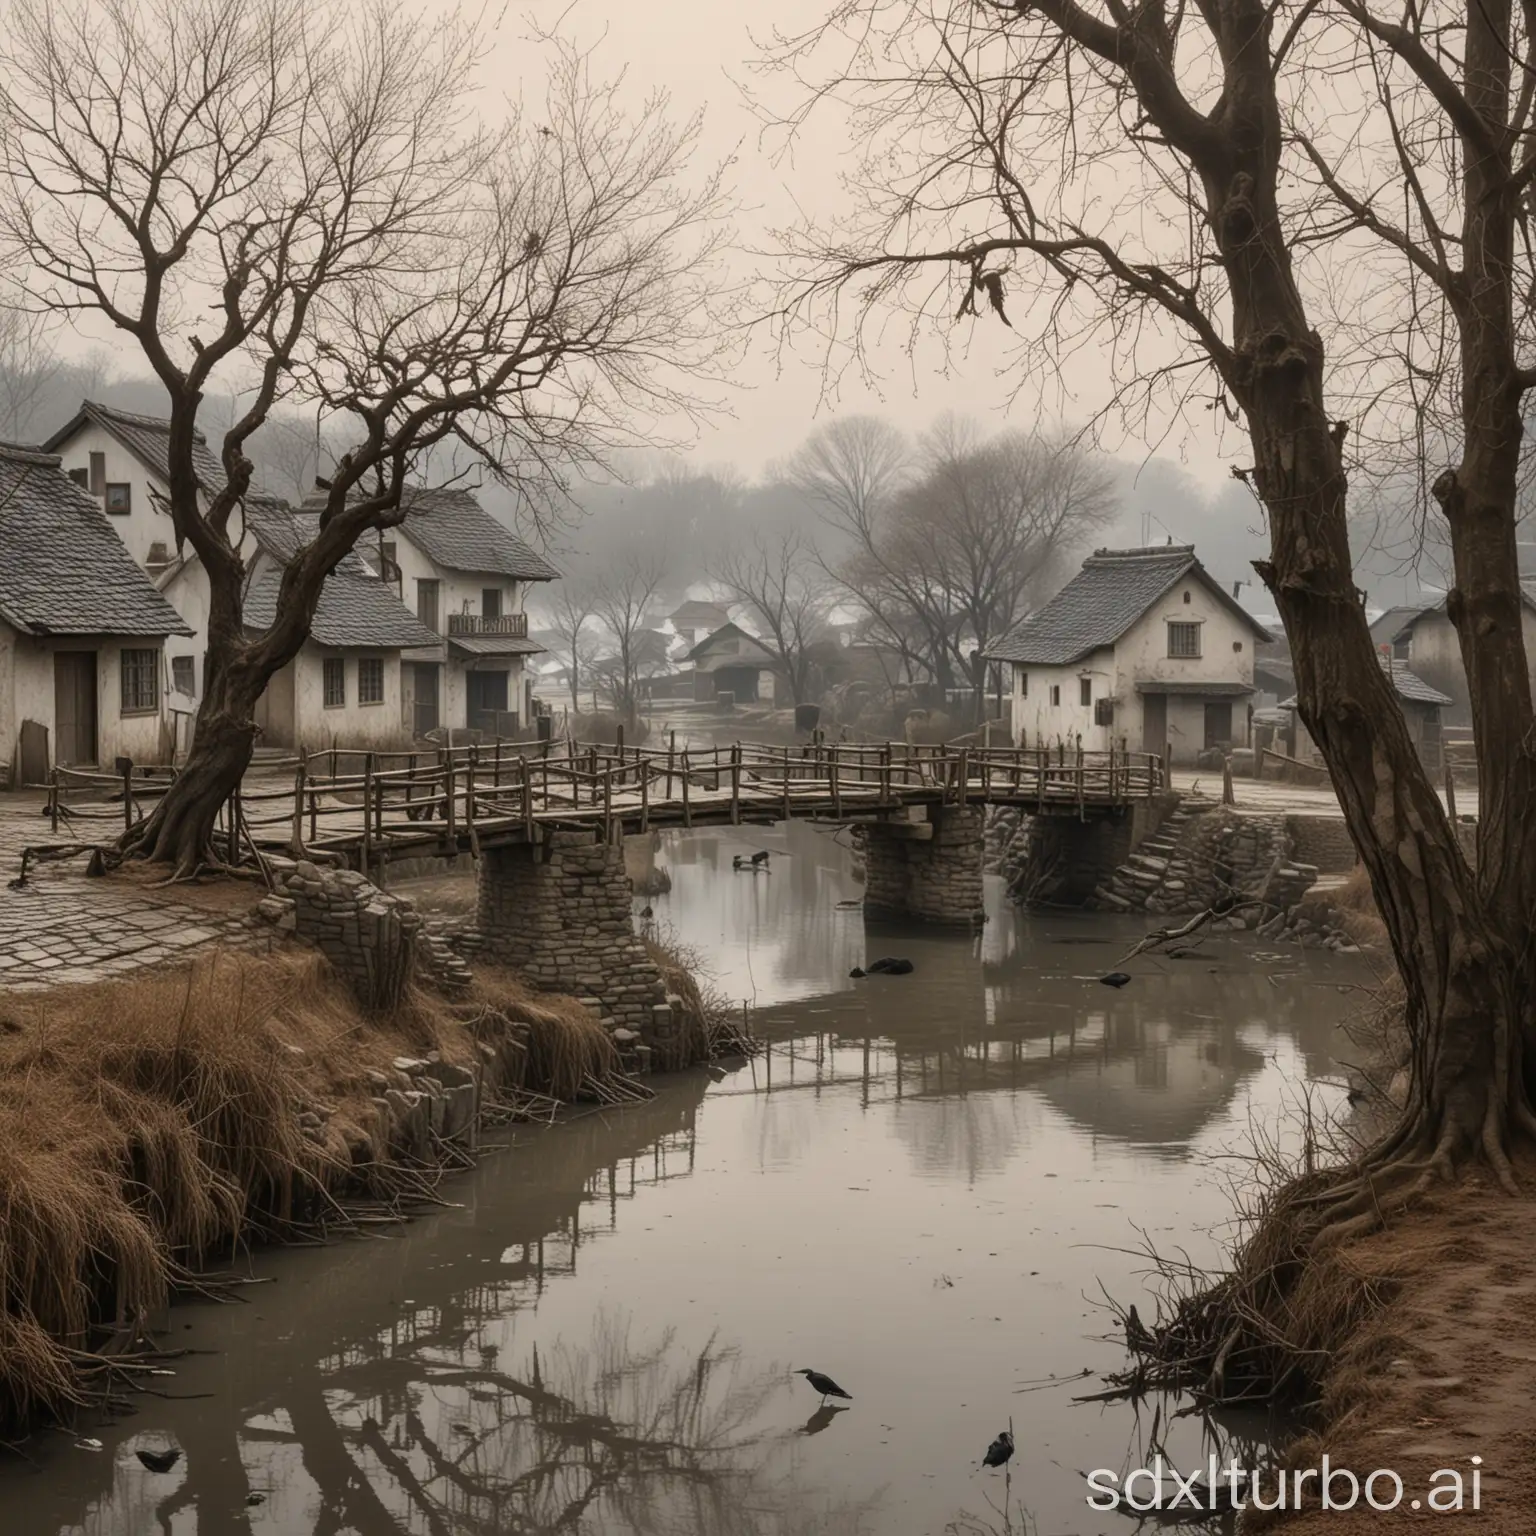 Tranquil countryside scenery, with withered vines entwined around old trees and a flock of dim-colored crows perching on the branches. Below is a small delicate bridge, clear water ripples under it, and one can see the bottom clearly. There are several houses beside the bridge, their roofs covered with gray tiles, white walls contrasting sharply with the surrounding scenery. The entire picture, painted in muted ink tones, creates a quiet and desolate atmosphere, revealing the tranquility and peacefulness of rural life.